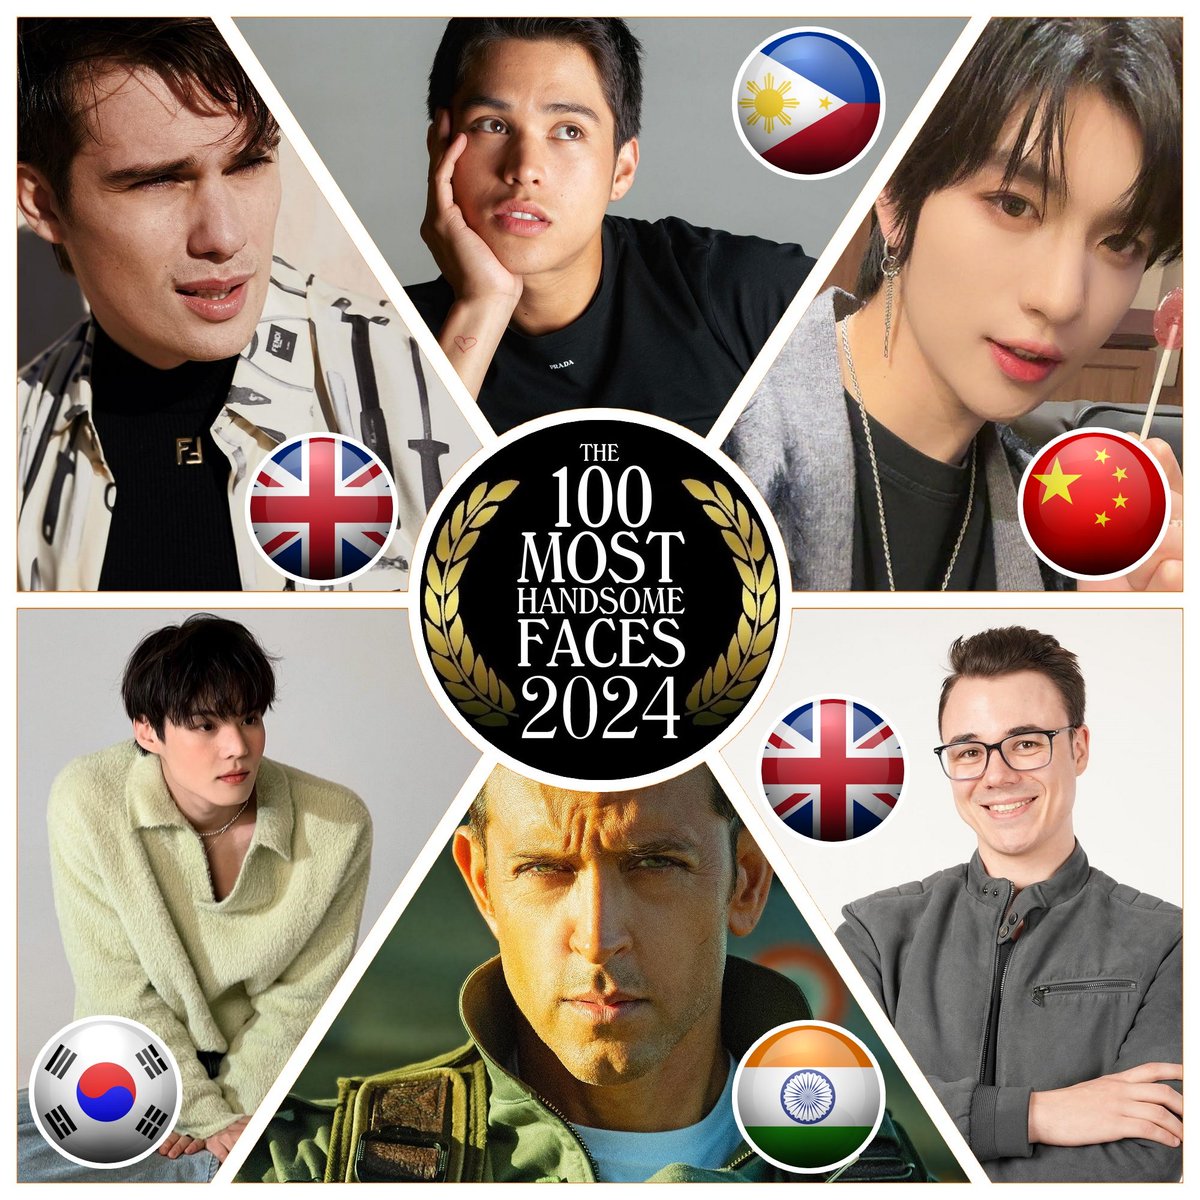 The 100 Most Handsome Faces in World 2024.
It is a matter of great pride that our Hrithik Roshan is also one of the 100 most handsome people.
#HrithikRoshan @iHrithik 🌸🩷